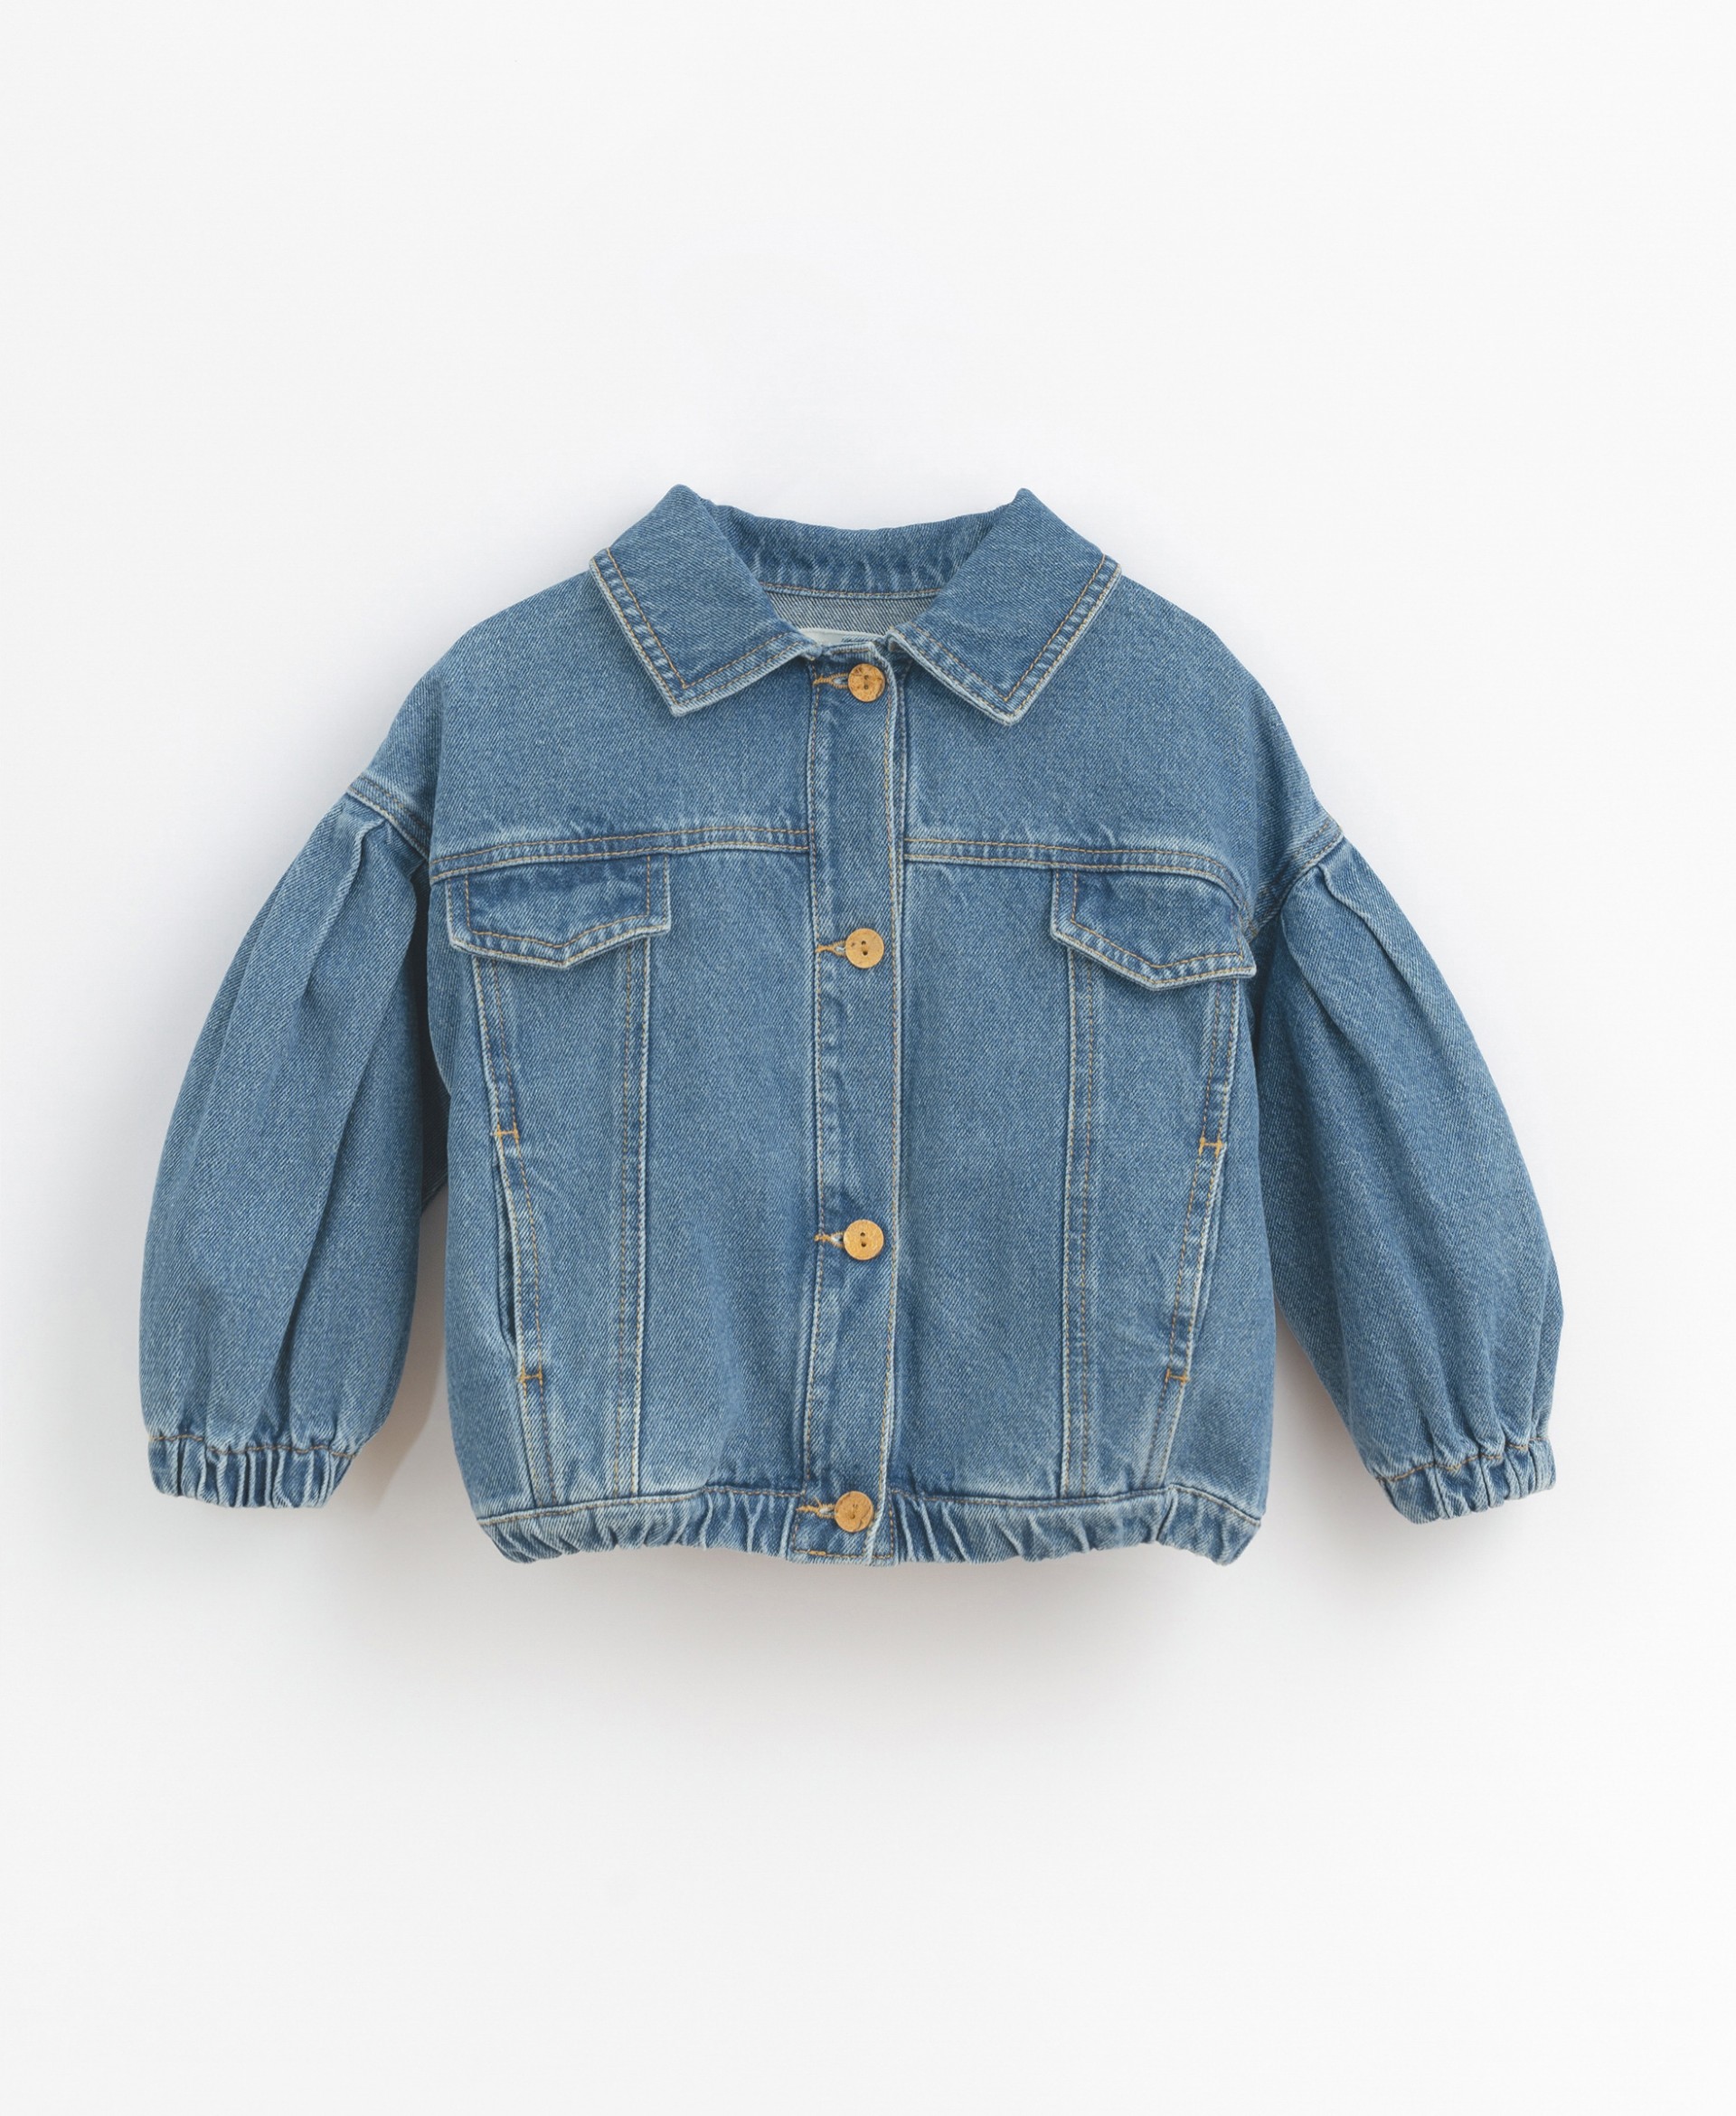 Denim jacket with cuff applications | Basketry